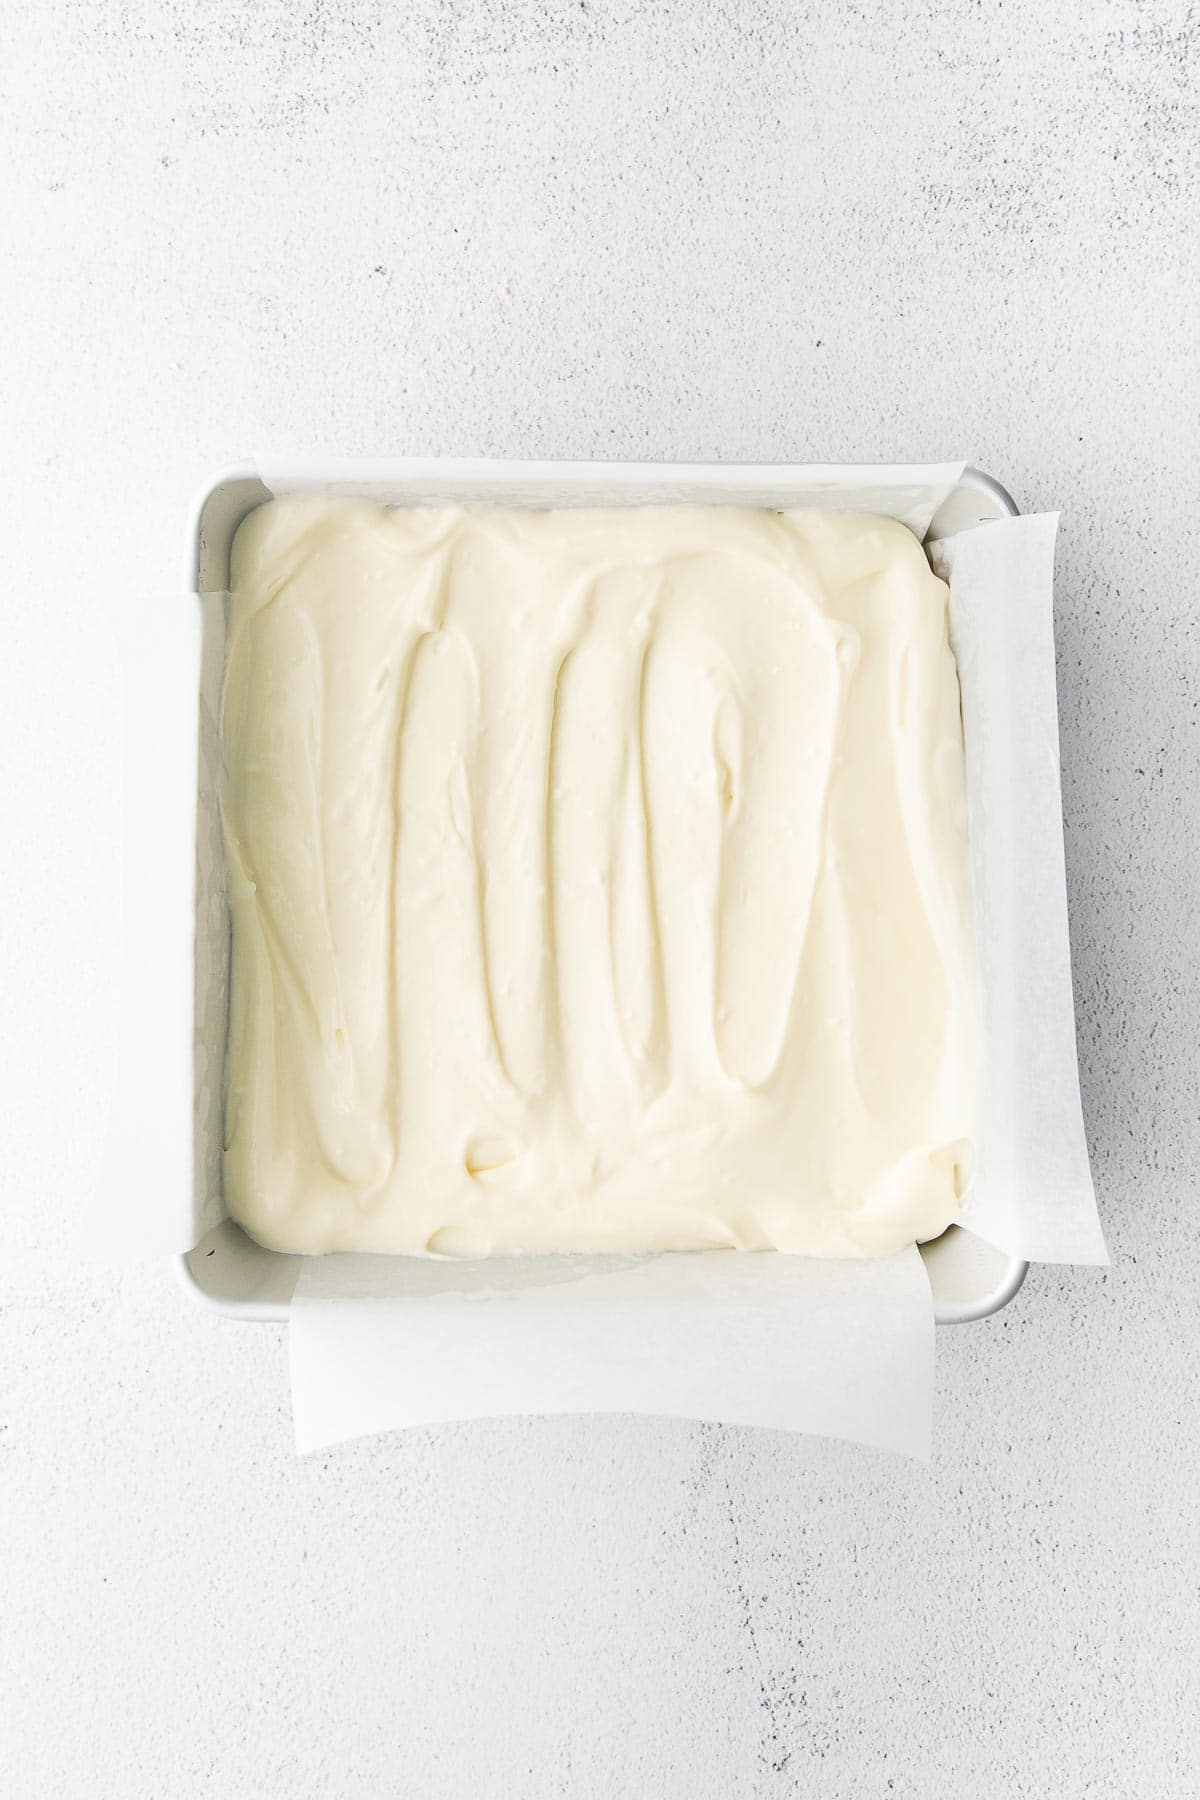 cream cheese mixture spread in a square baking dish